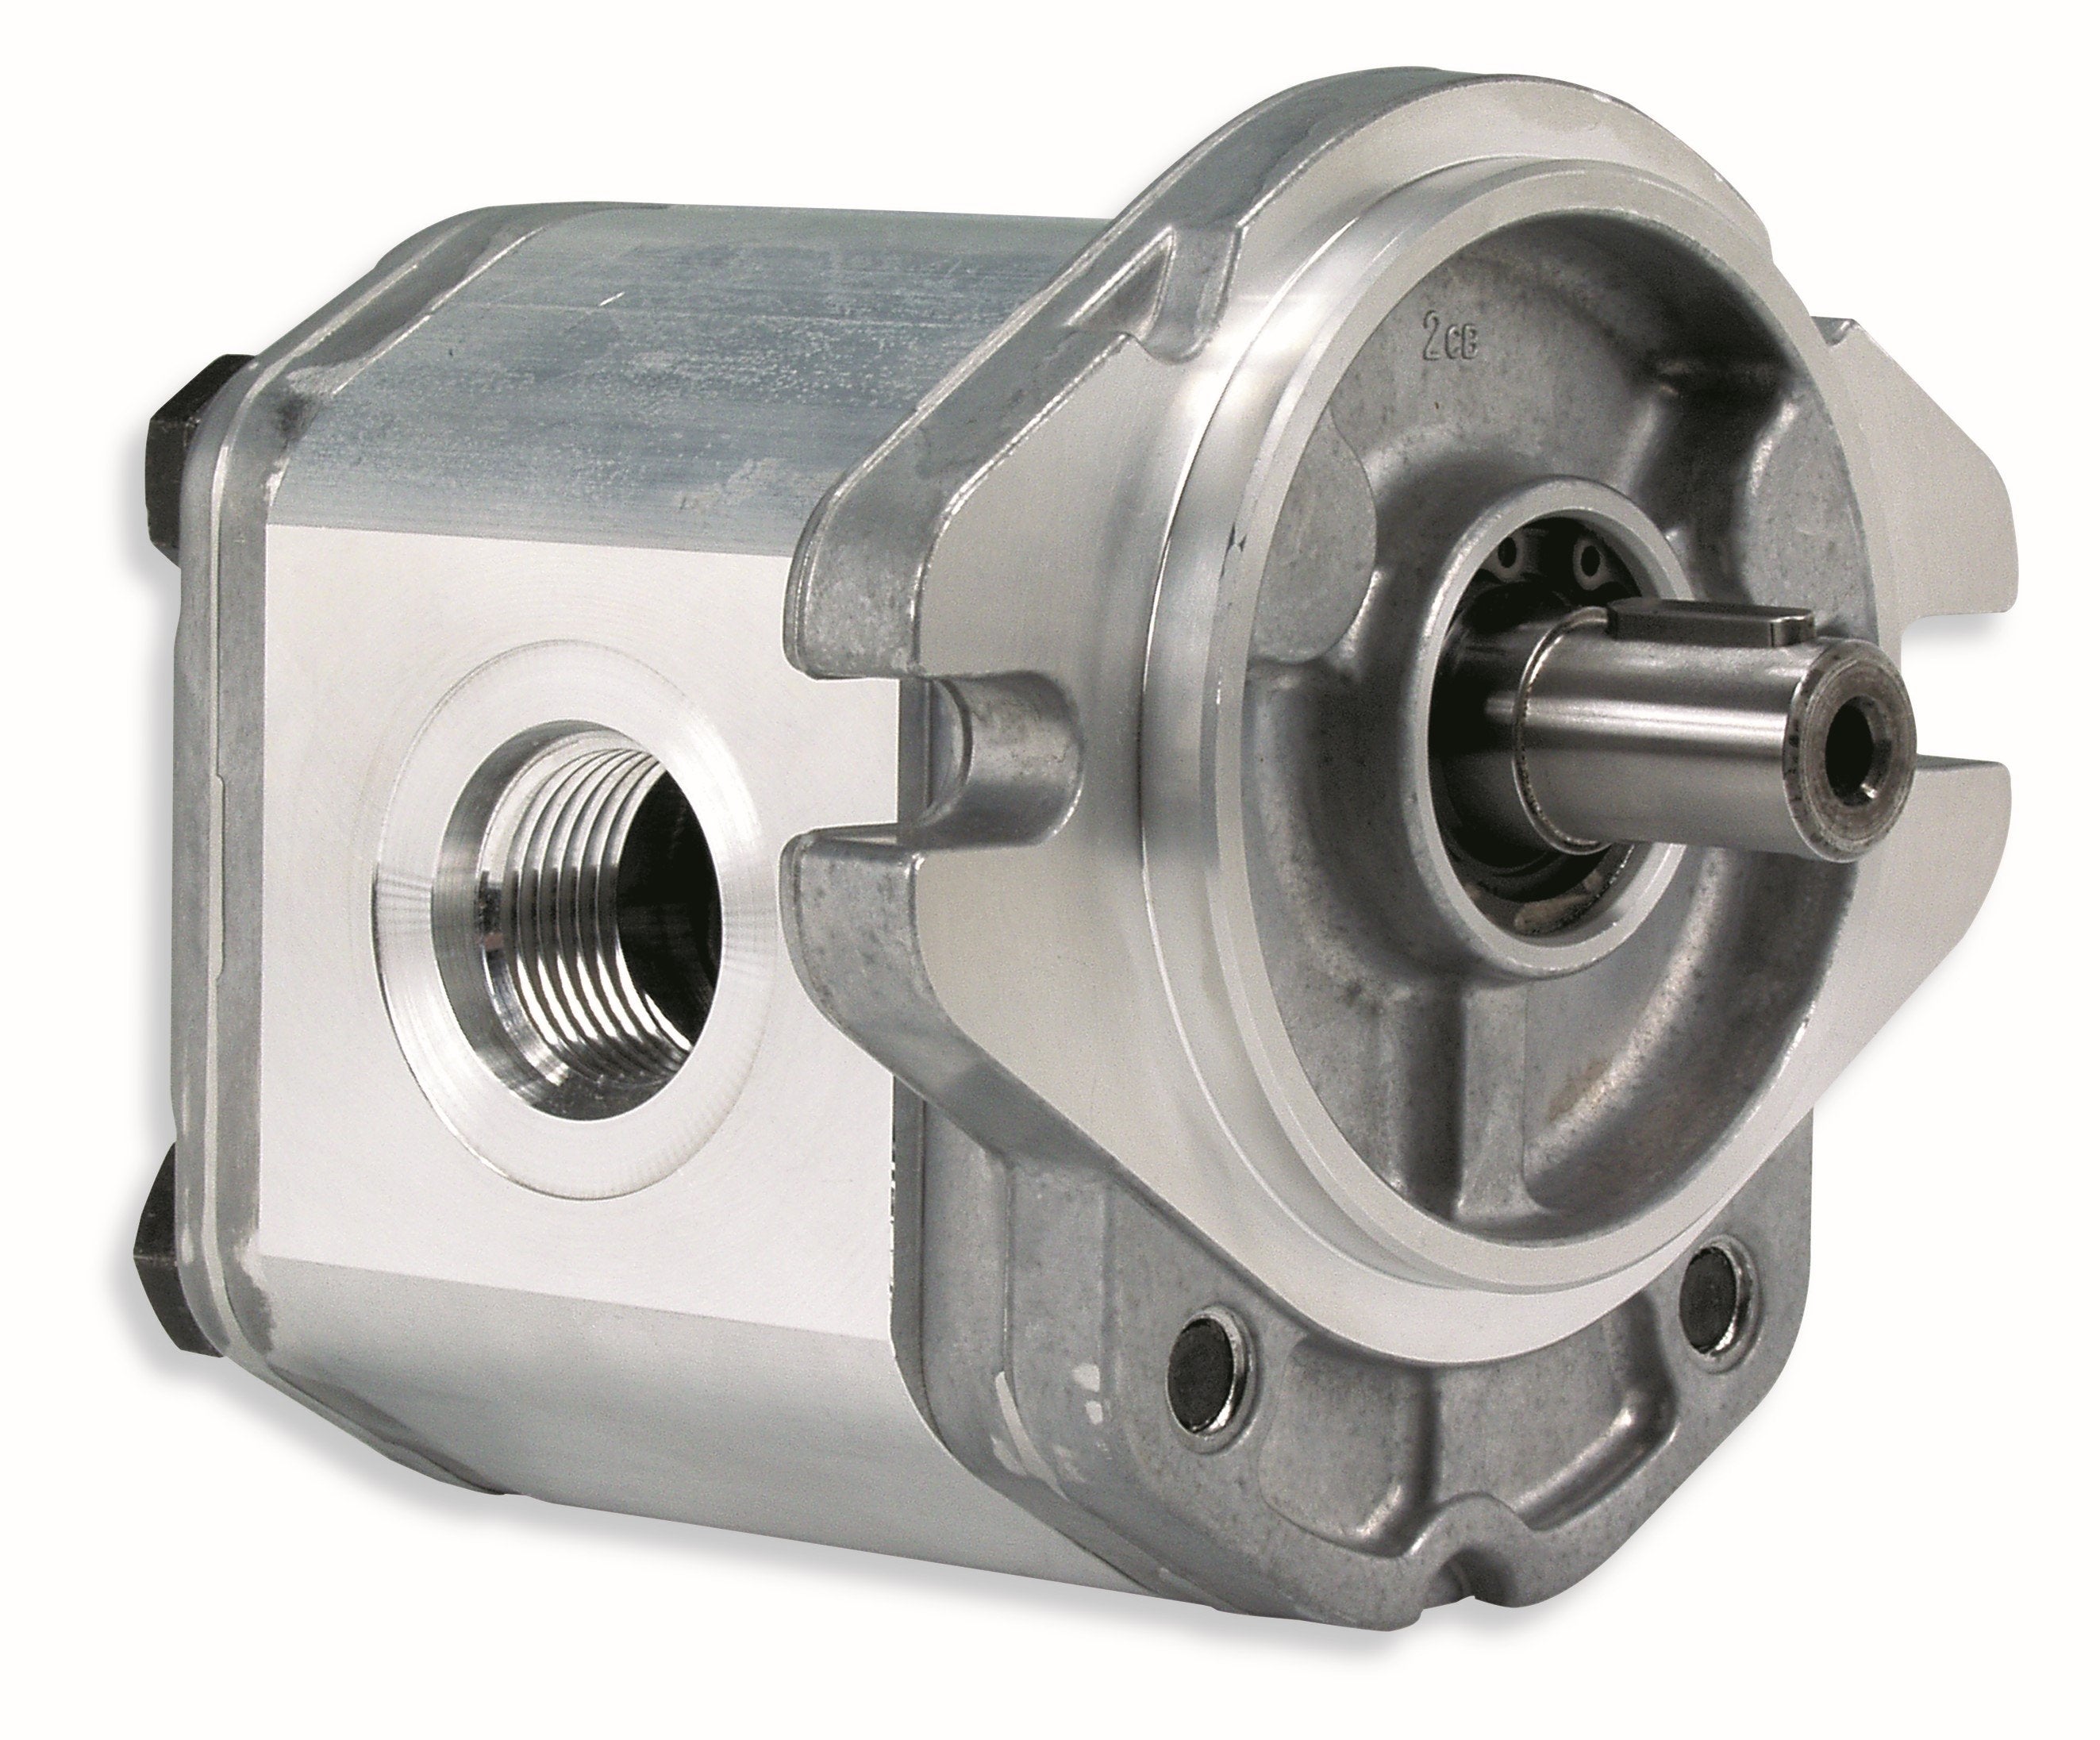 GHM3A-R-94-E4 : Marzocchi Gear Motor, Bidirectional, 61cc, 3045psi rated, 2800RPM, 1.25" Code 61 ports, 7/8" Bore x 1/4" Keyed Shaft